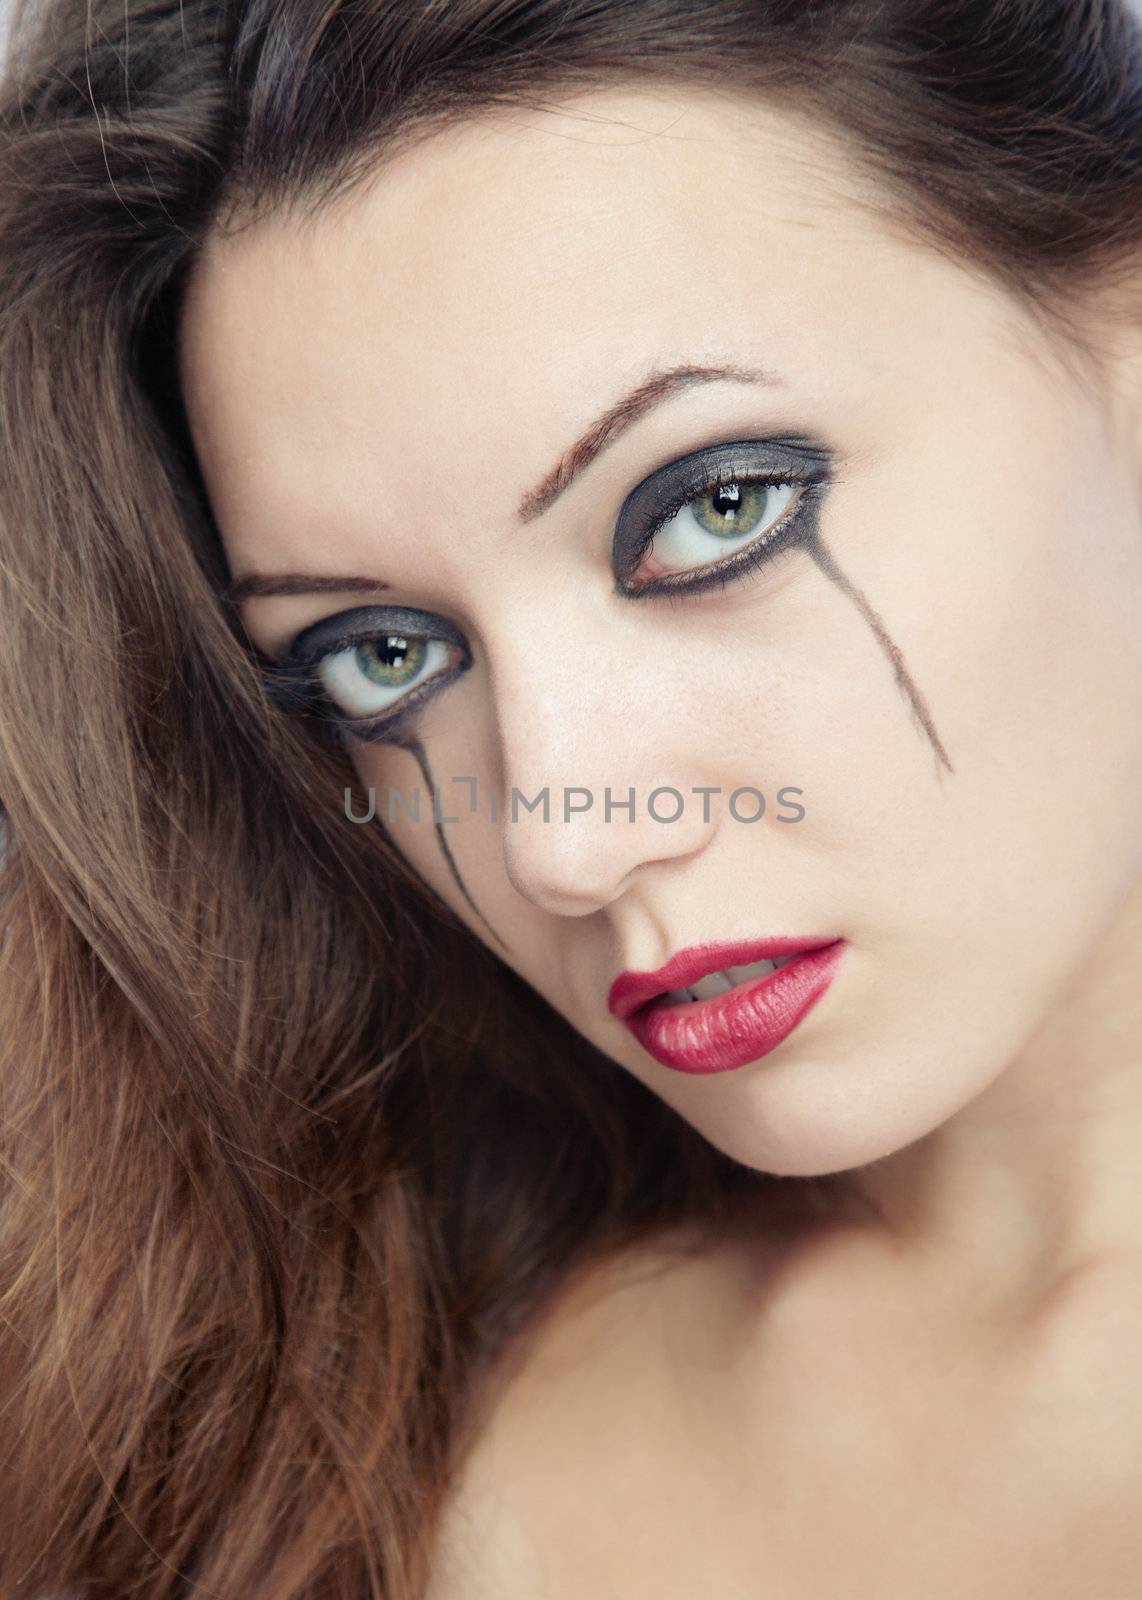 Sad woman with odd makeup. Close-up portrait with natural colors 